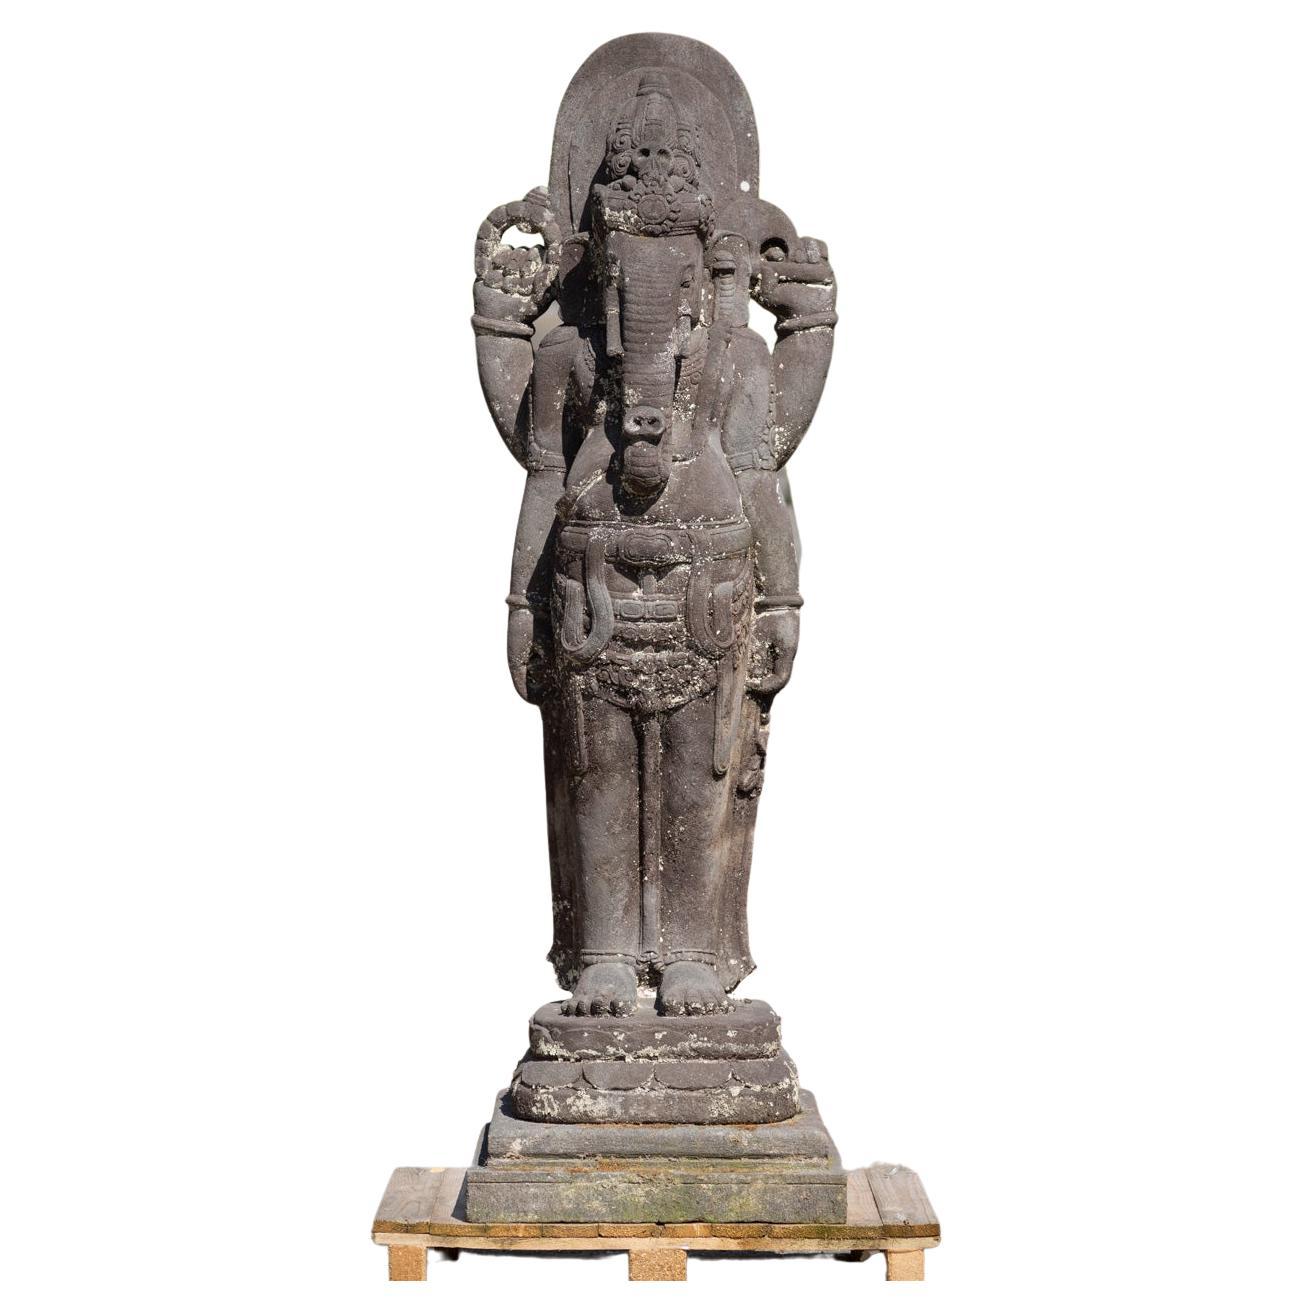 Middle 20th century large old lavastone Ganesha statue from Indonesia